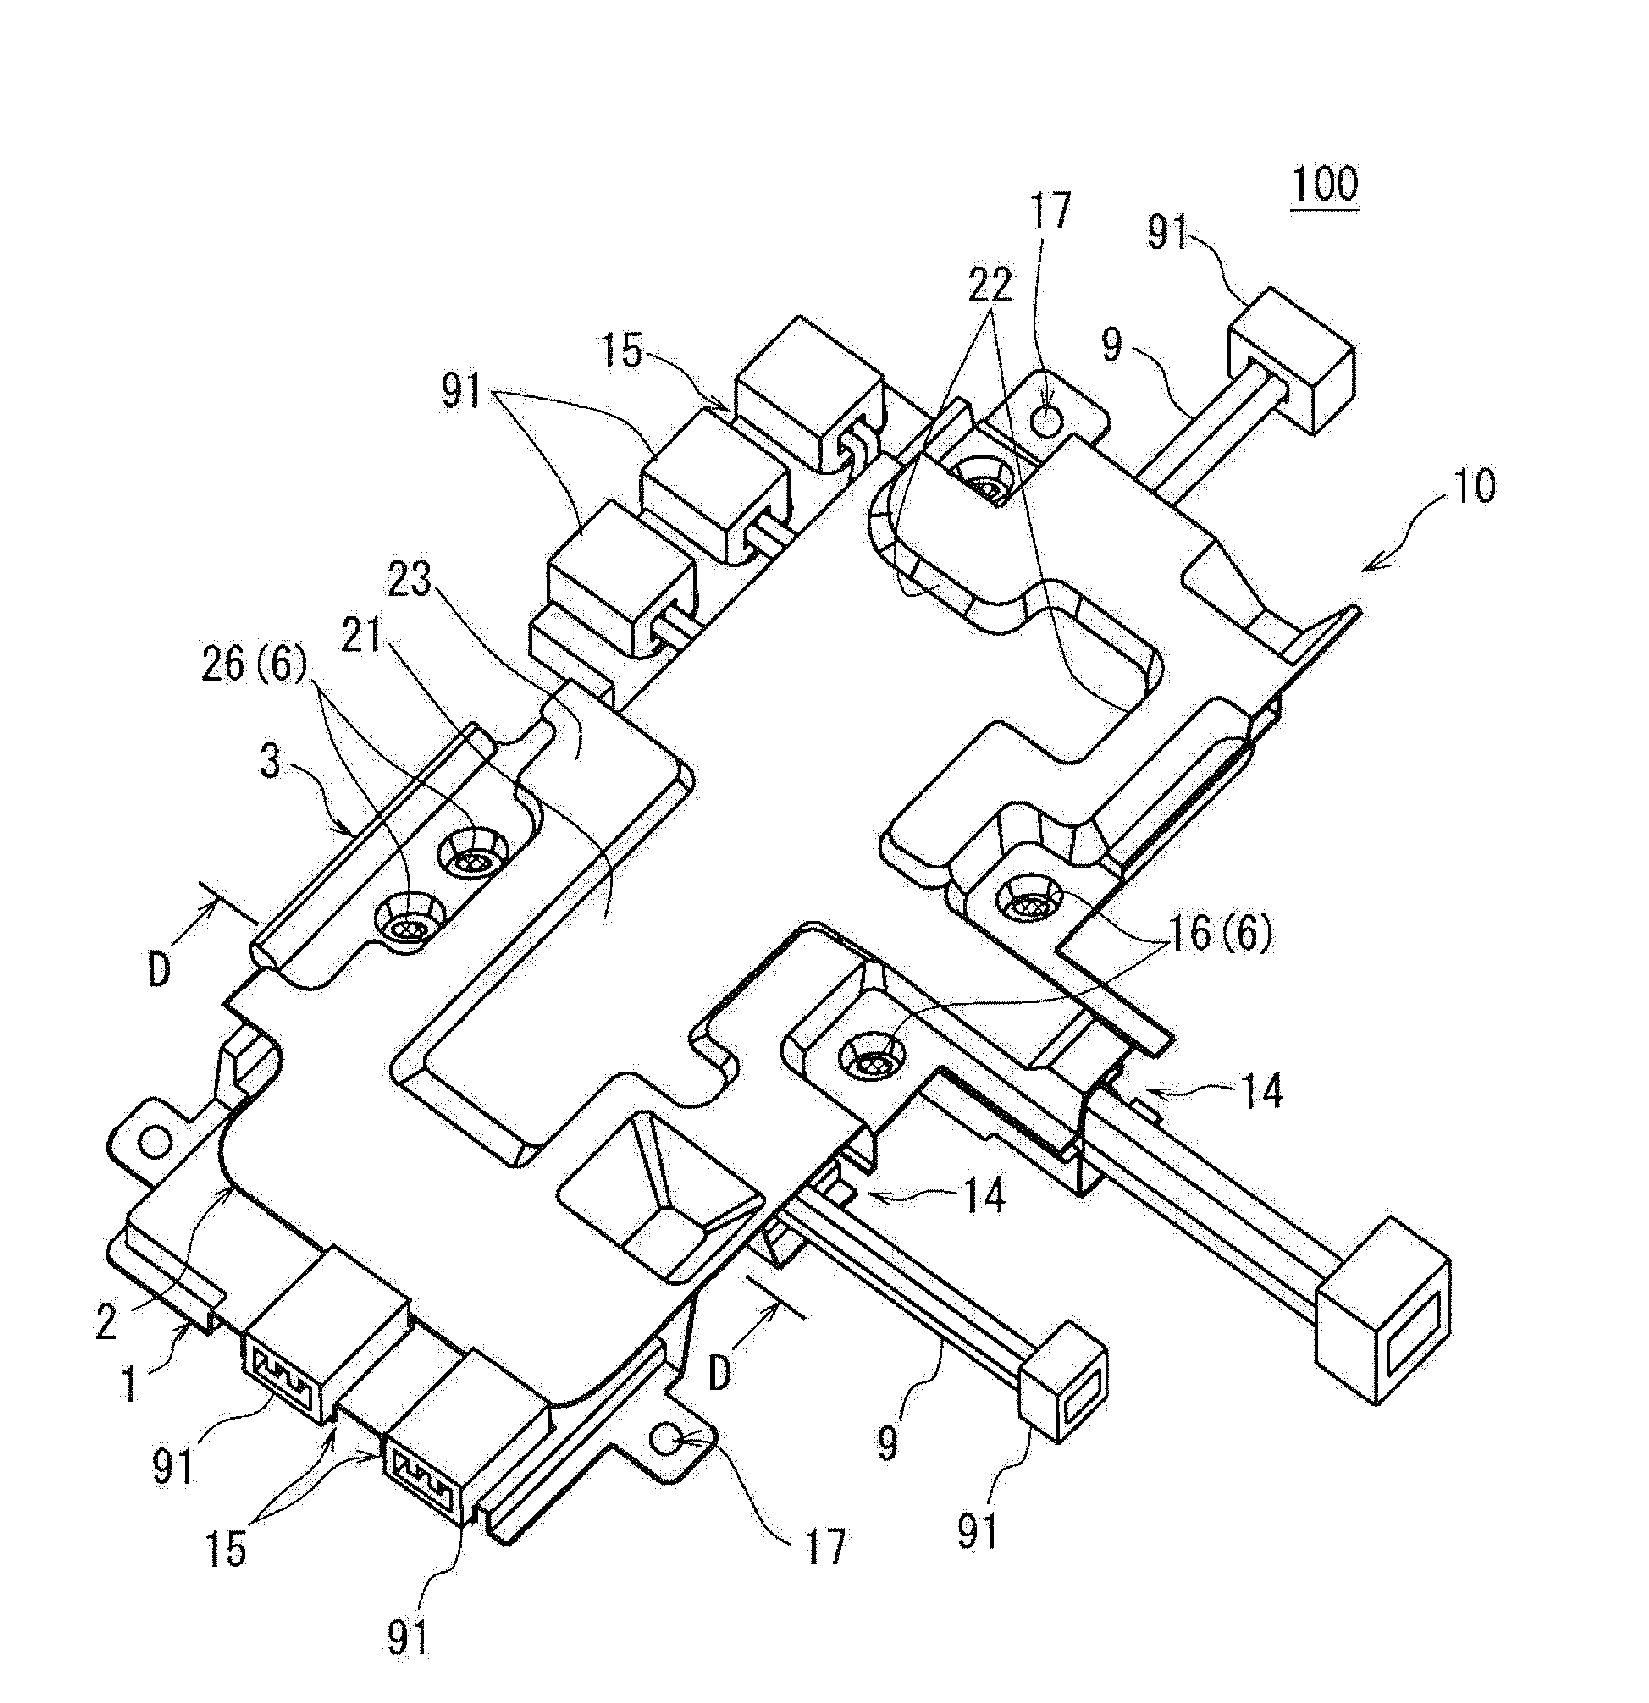 Connector supporting tool, wiring tool and wiring harness